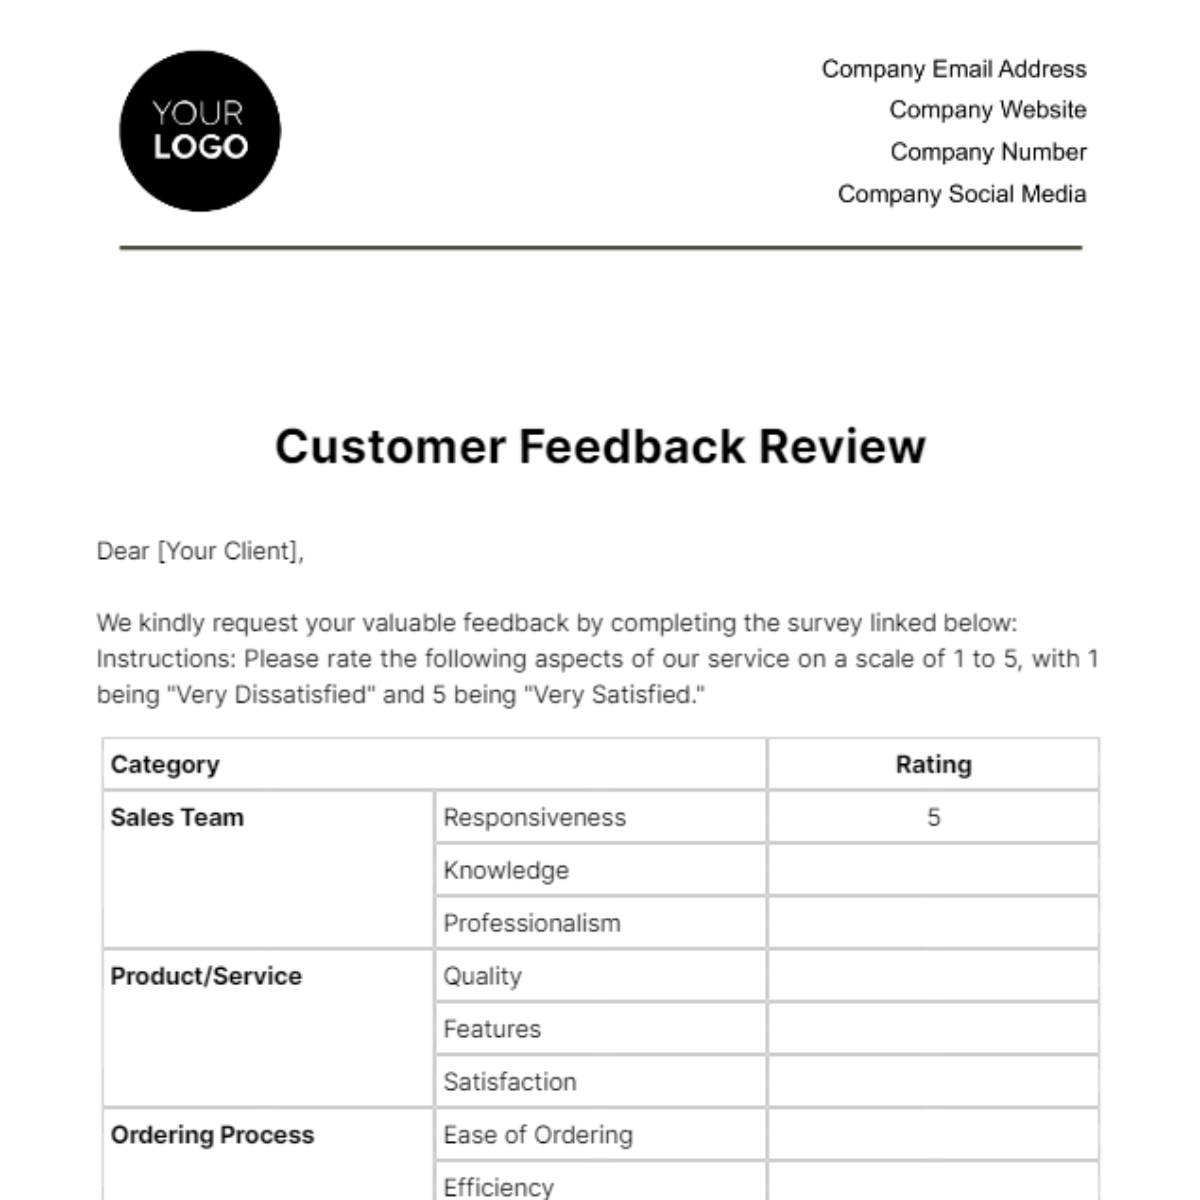 Customer Feedback Review Template